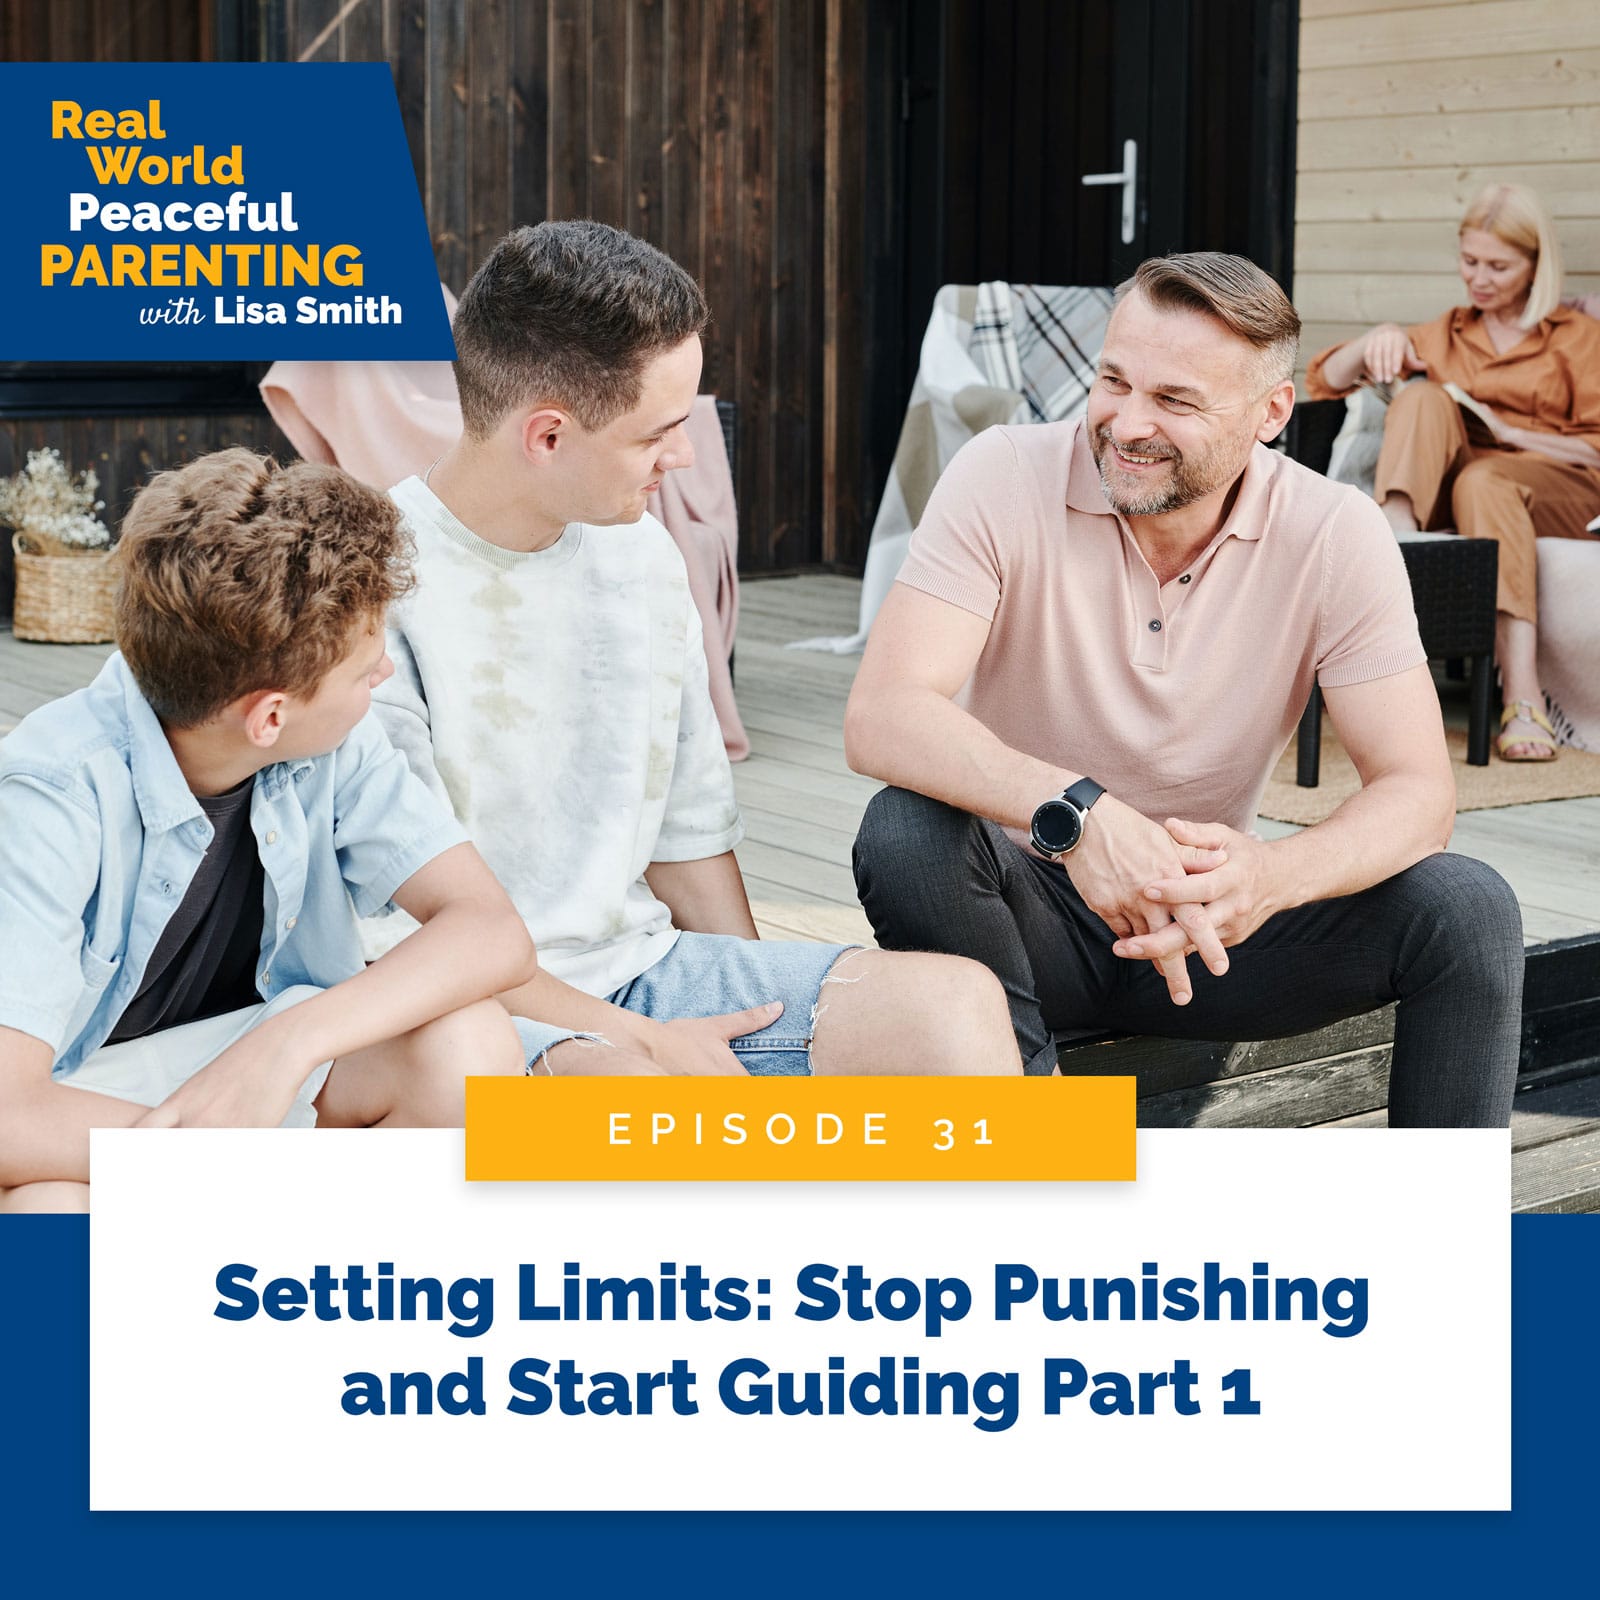 Real World Peaceful Parenting with Lisa Smith | Setting Limits: Stop Punishing and Start Guiding Part 1